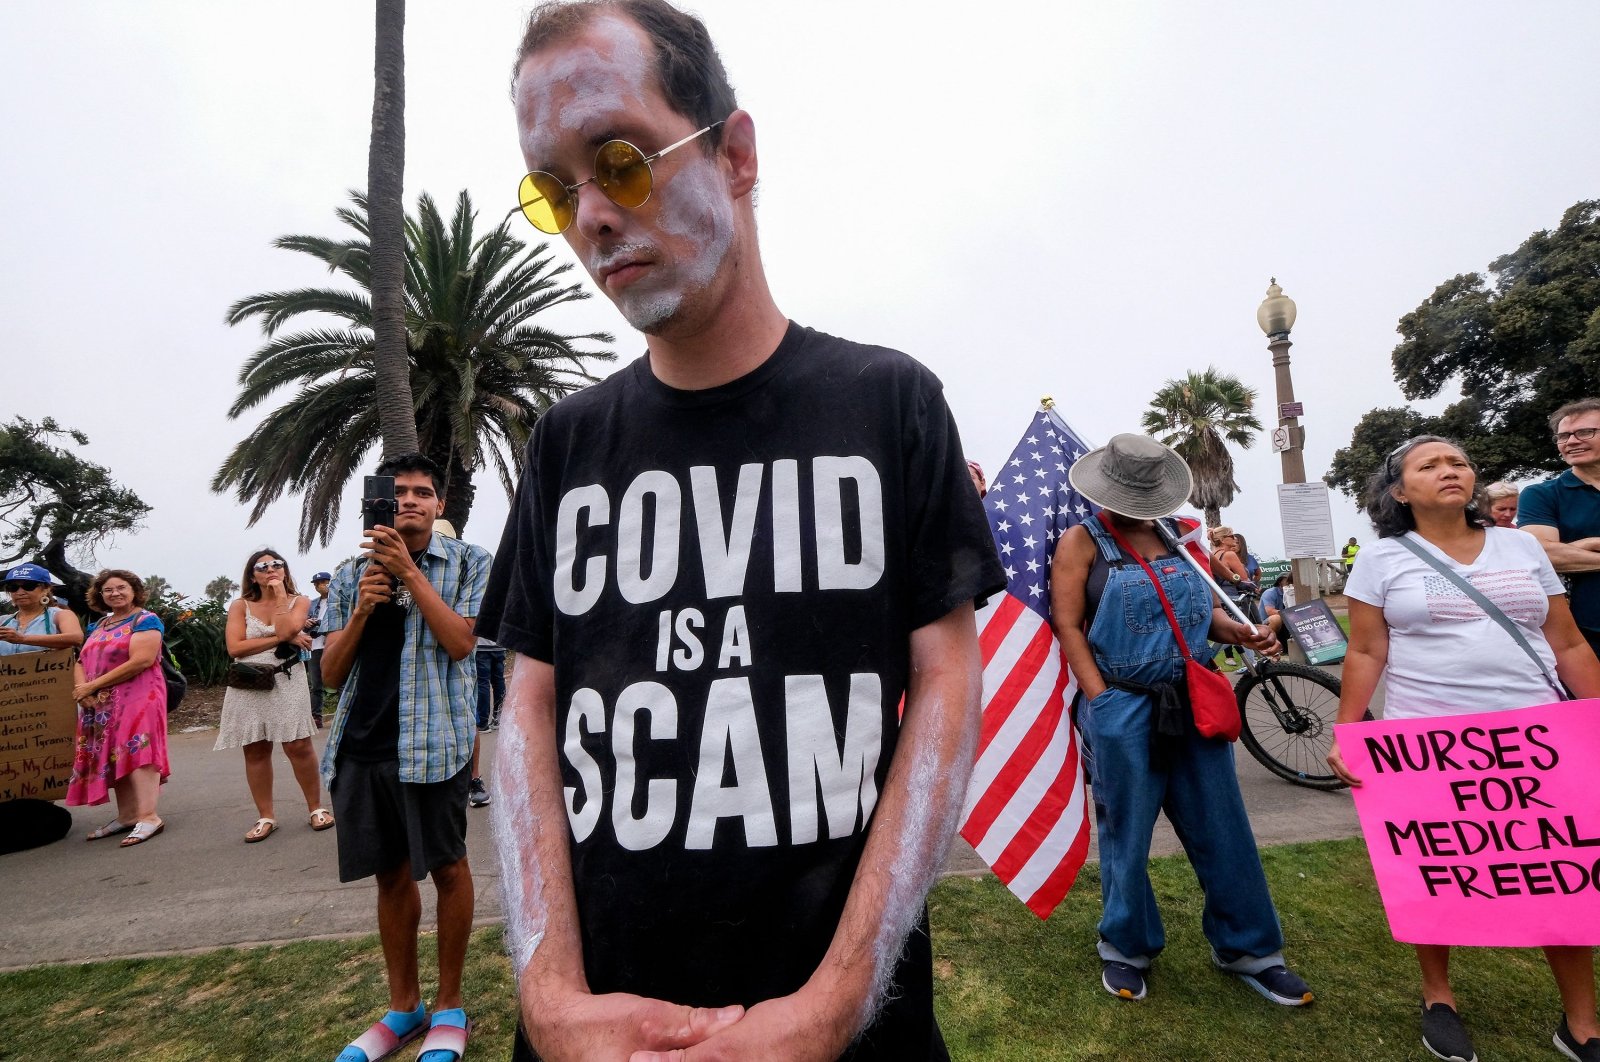 Anti-vaccination protesters take part in a rally against COVID-19 vaccine mandates, in Santa Monica, California, U.S., Aug. 29, 2021. (AFP File Photo)